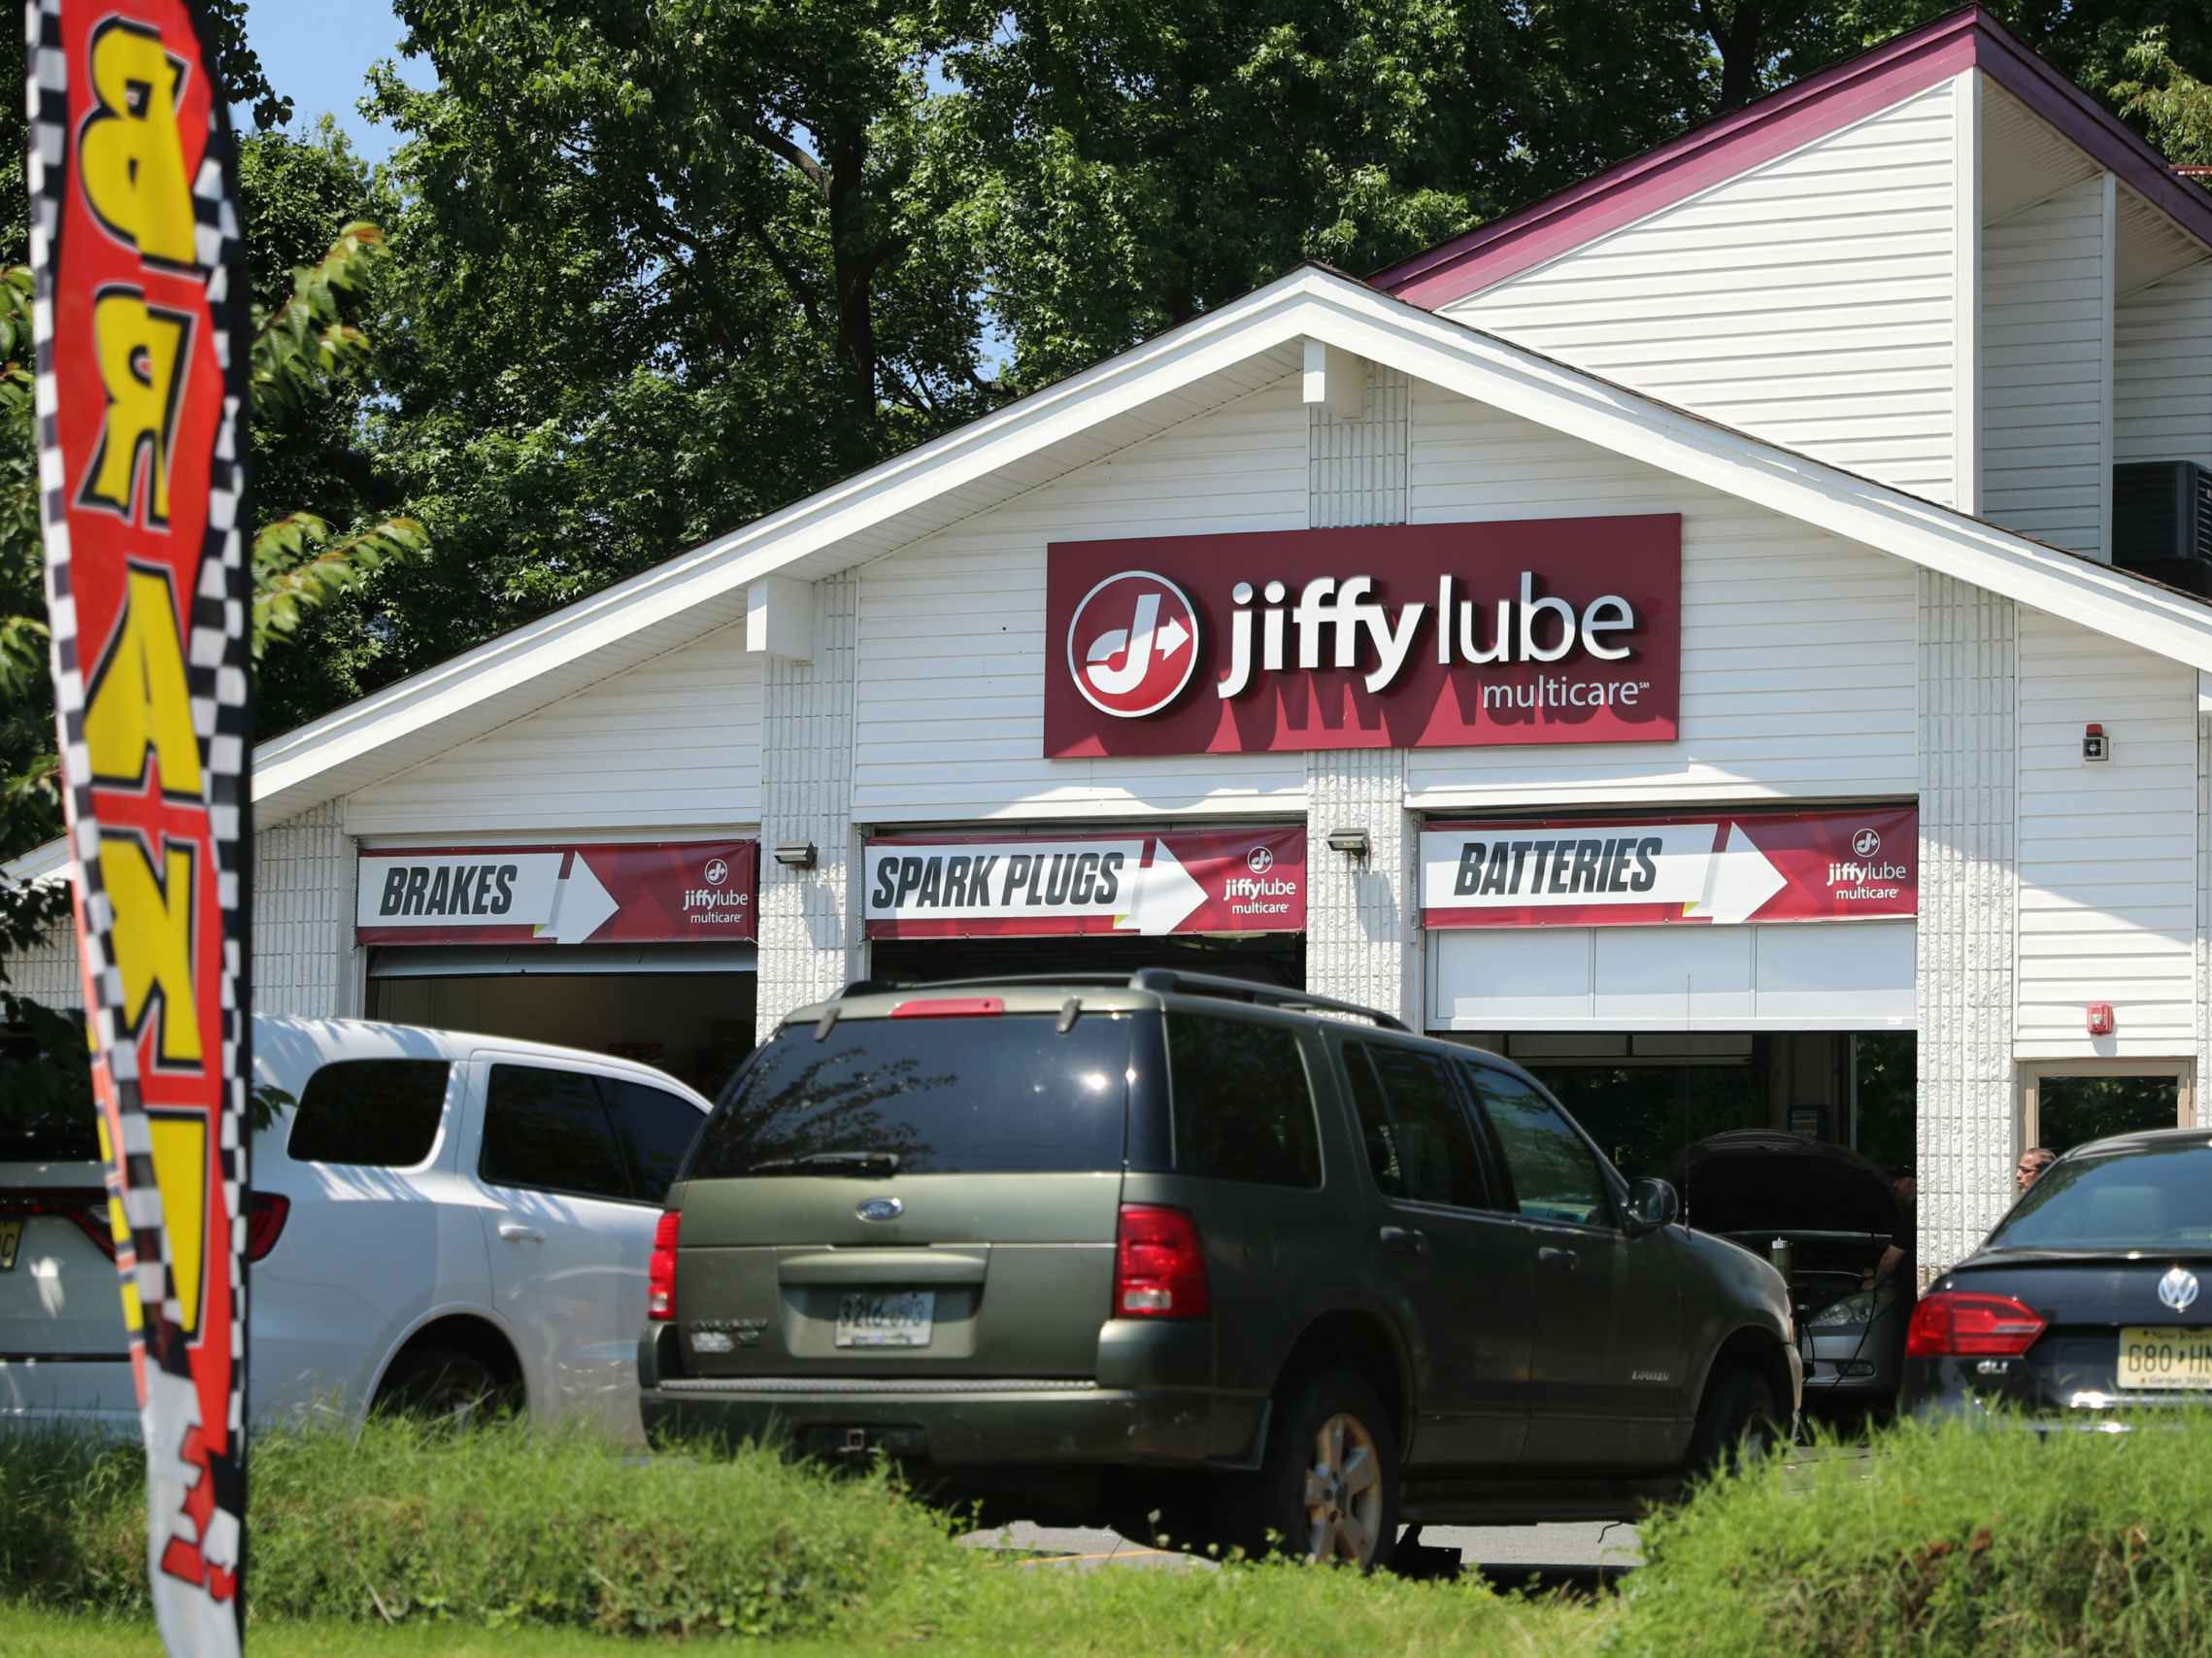 A Jiffy Lube store front for cheapest place to get your brakes done.